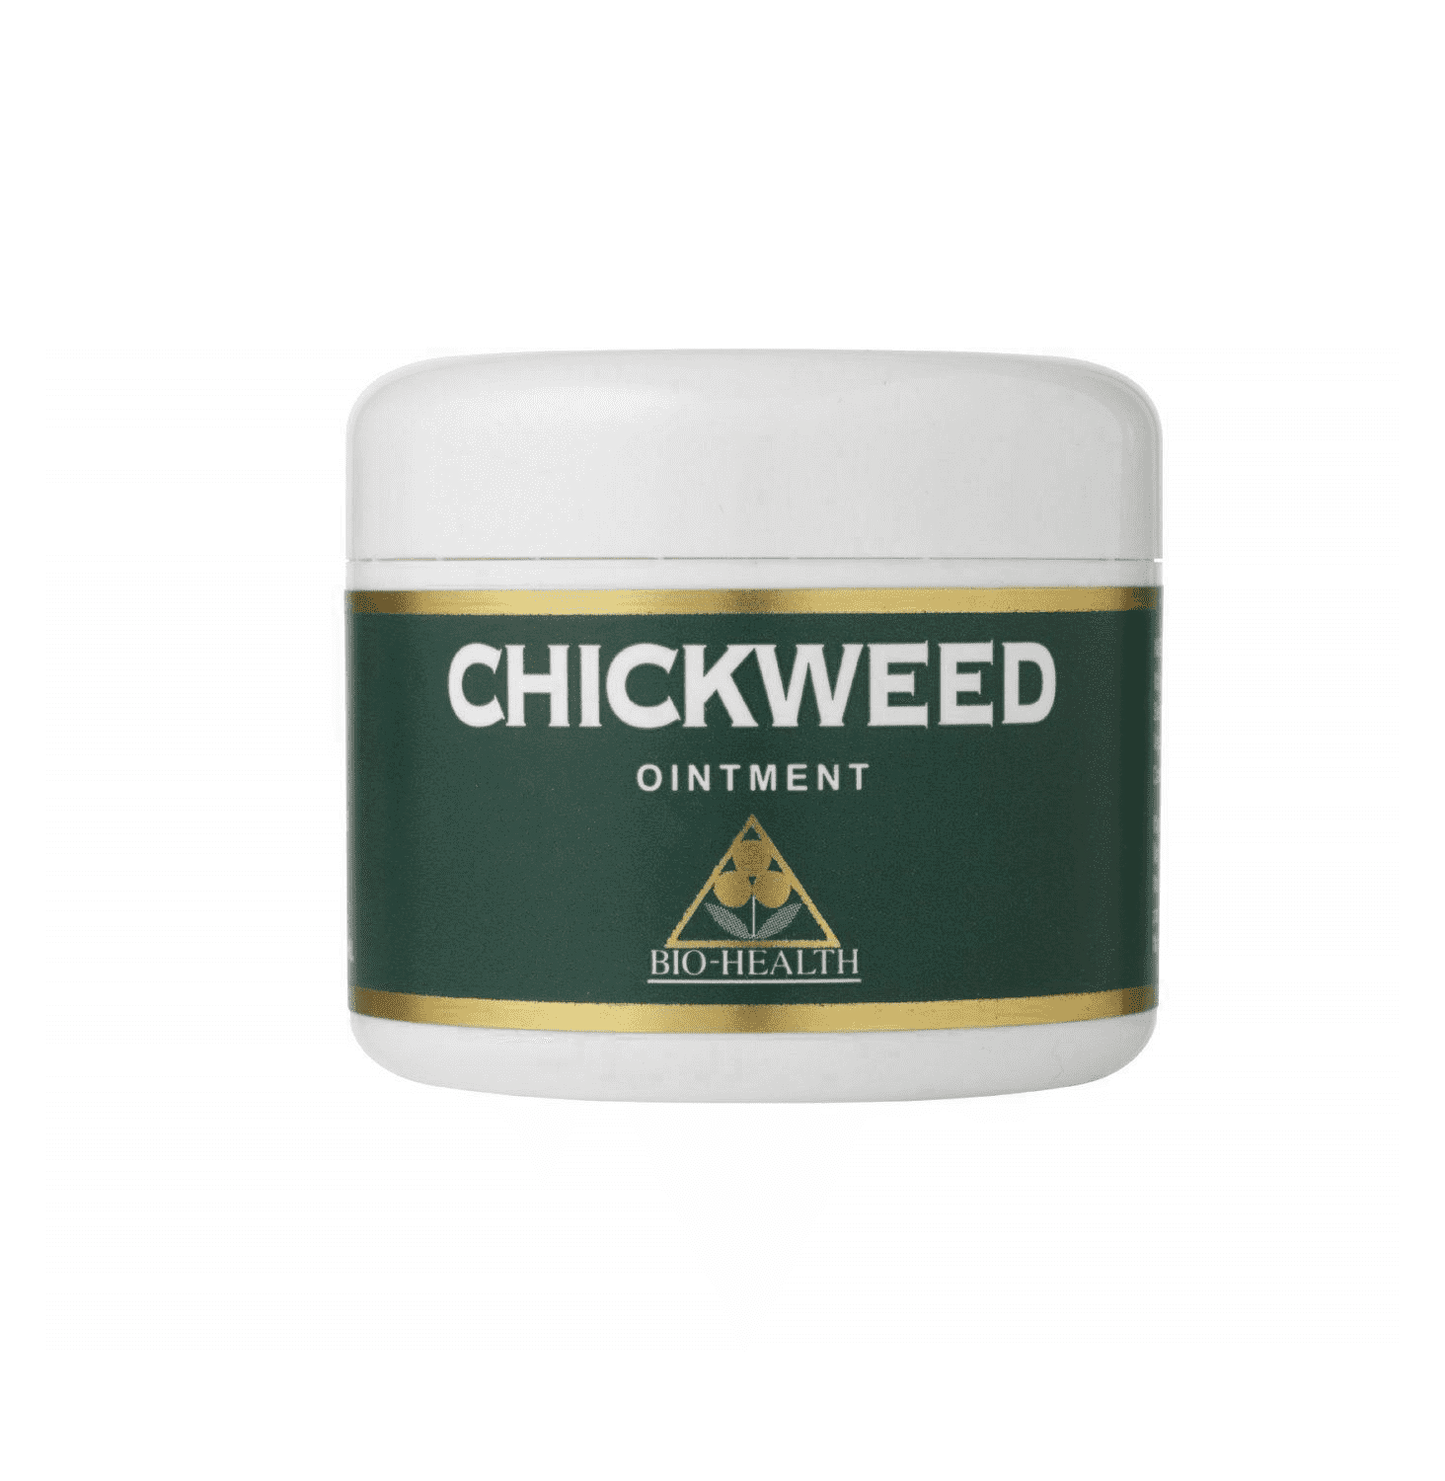 Bio Health Chickweed Ointment 42g